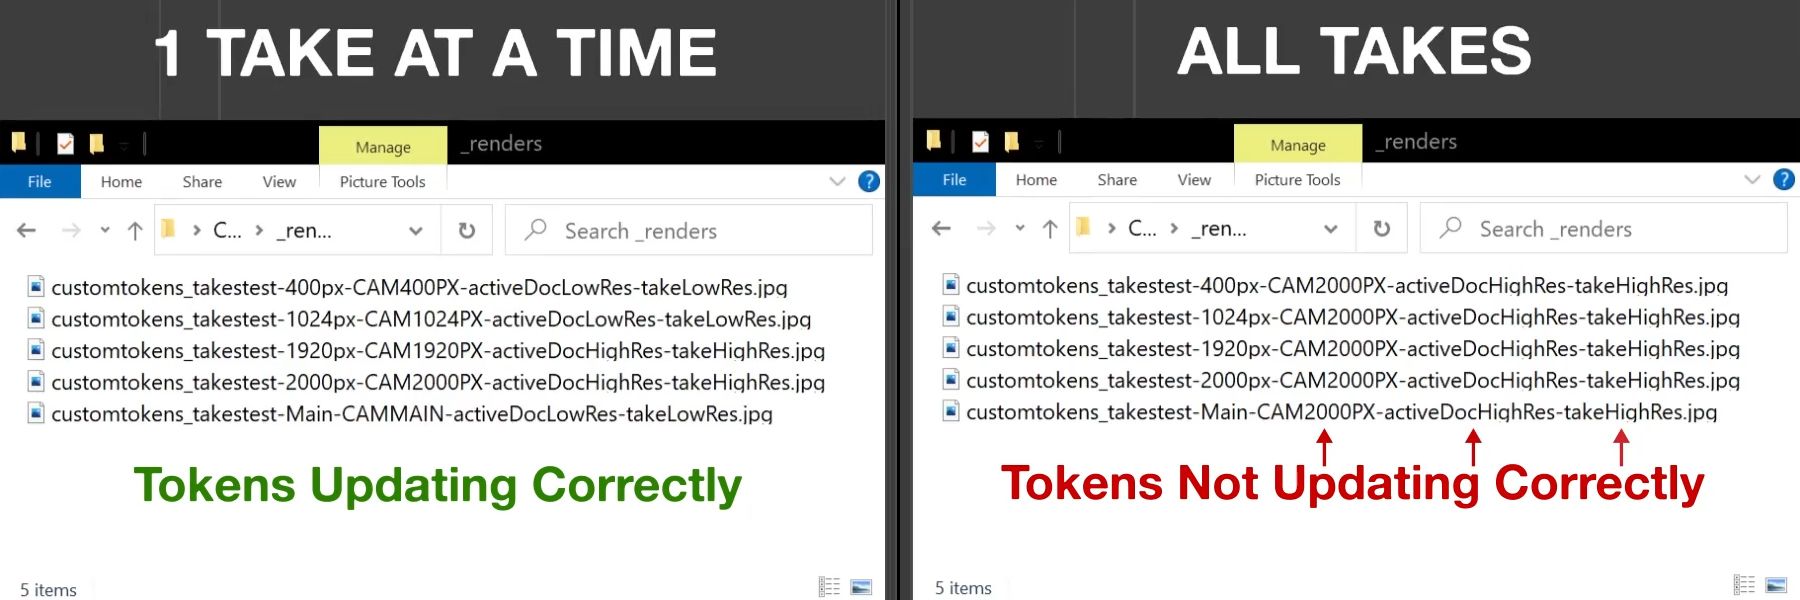 Tokens_Not_Updating_With_Multiple_Takes-Screenshots-v001.jpg